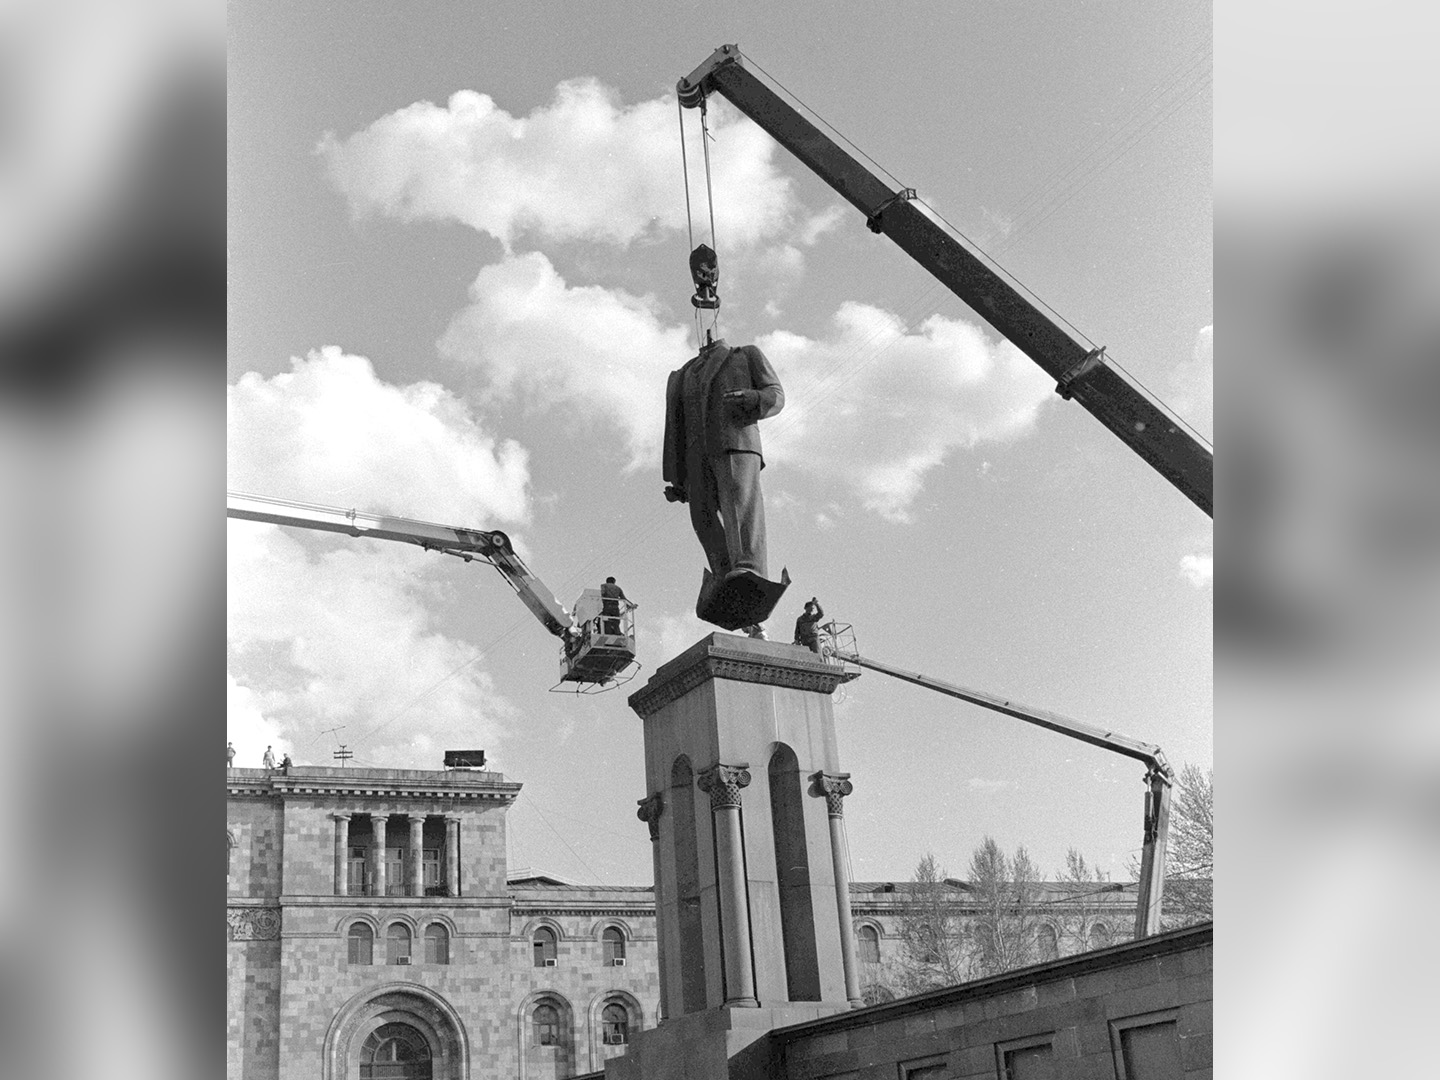 A bronze statue of Lenin is removed head first from its high pedestal in the eponymous square, renamed Republic Square in the early 1990s. The statue’s remains lie in the courtyard of the National Museum across the square.